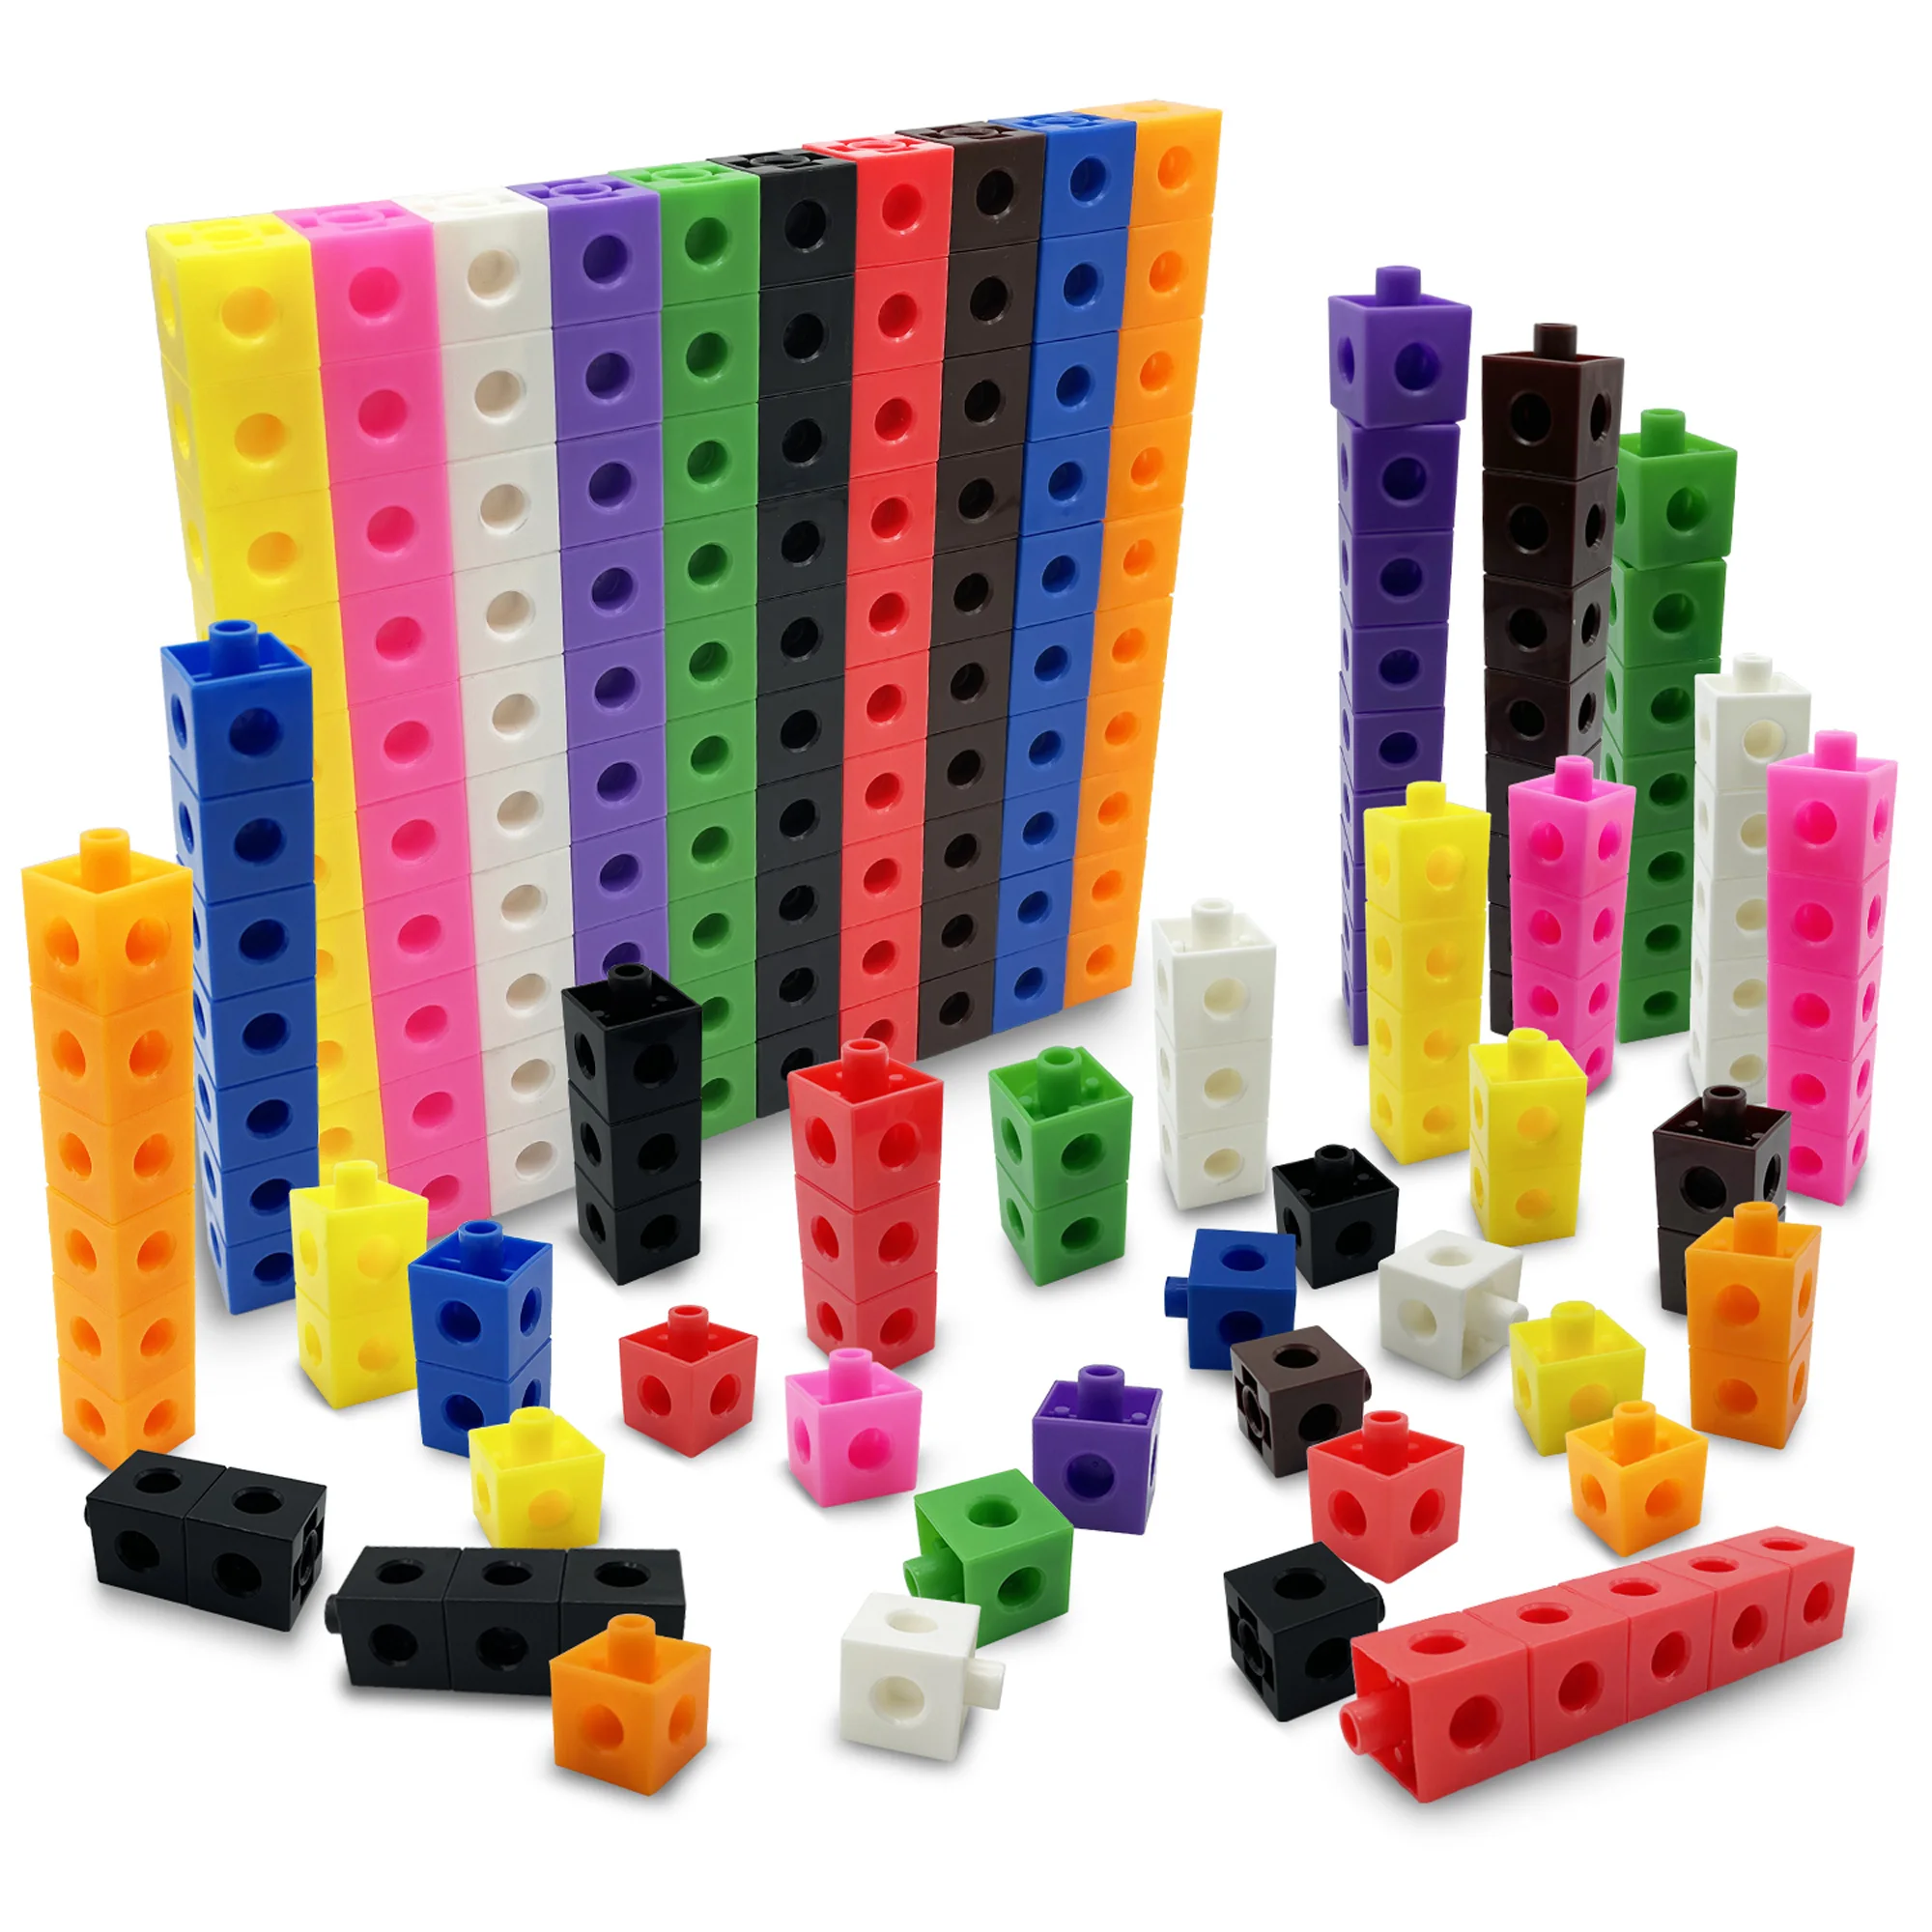 

100Pcs 10 colors Multilink Linking Counting Cubes Snap Blocks Teaching Math Manipulative Kids Early Education Toy